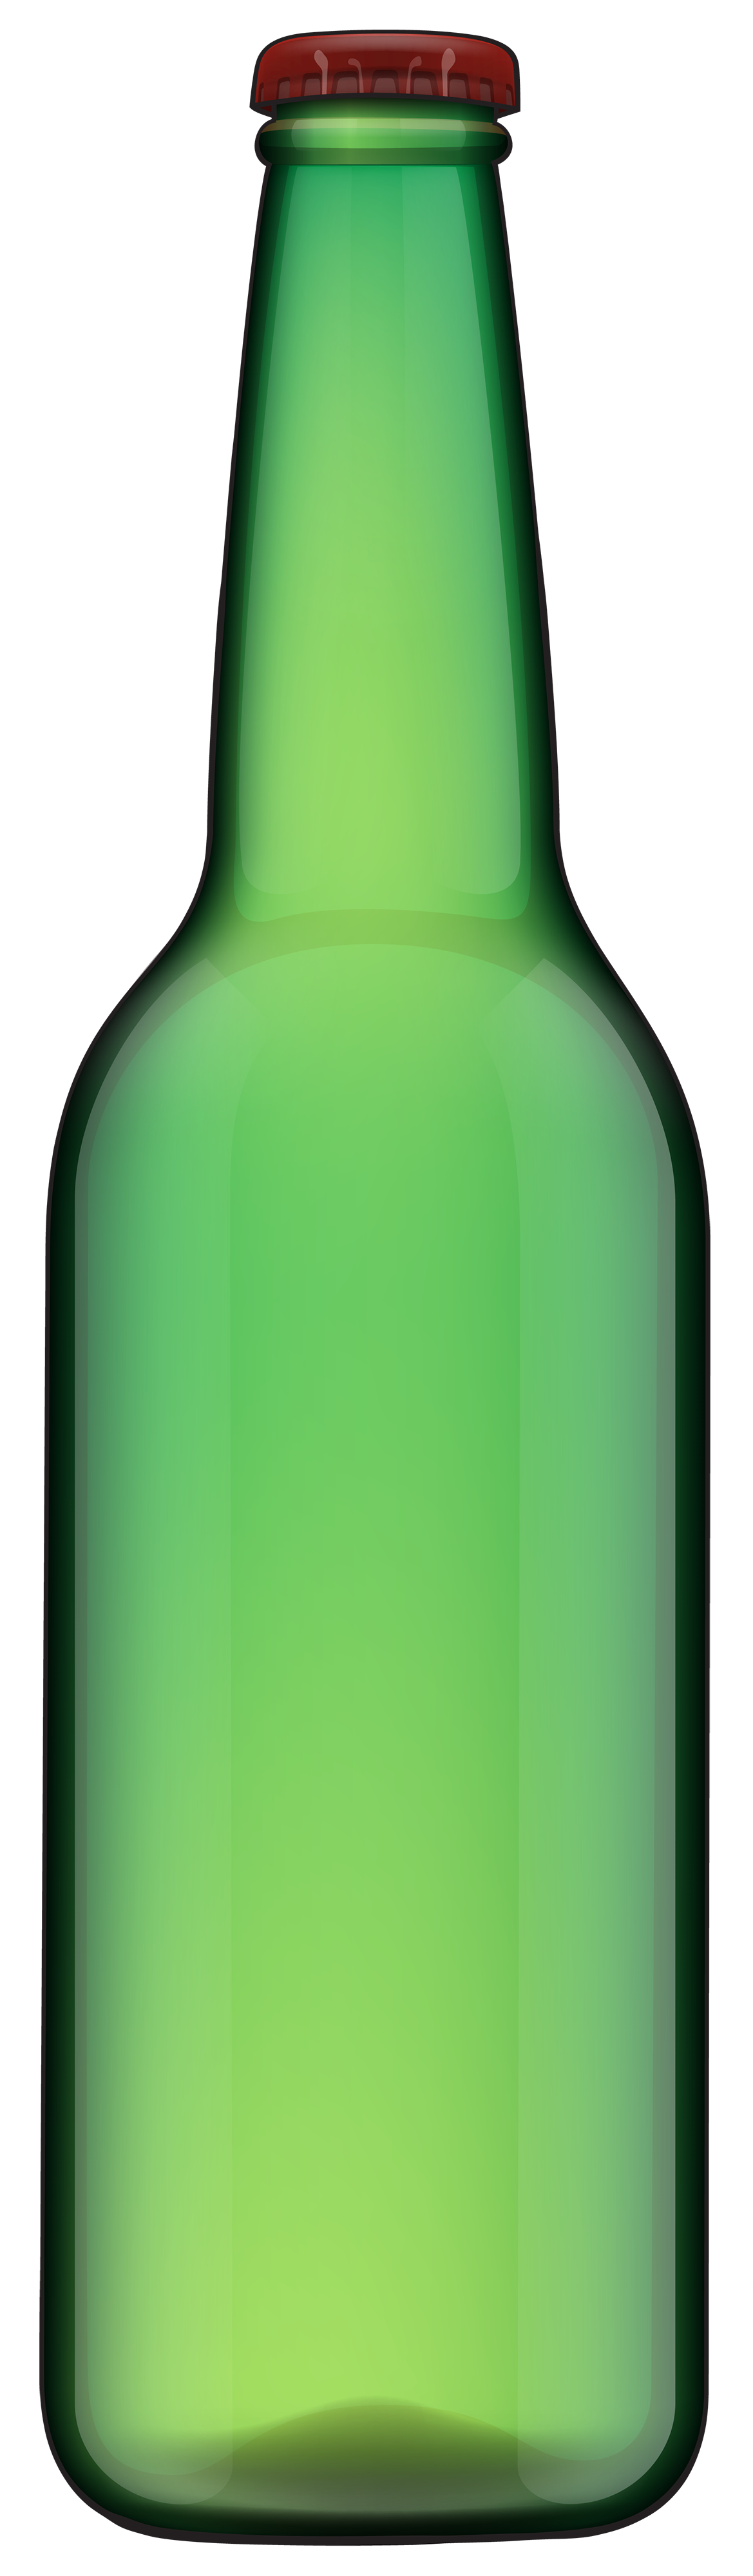 White Old Glue Home Bottle PNG